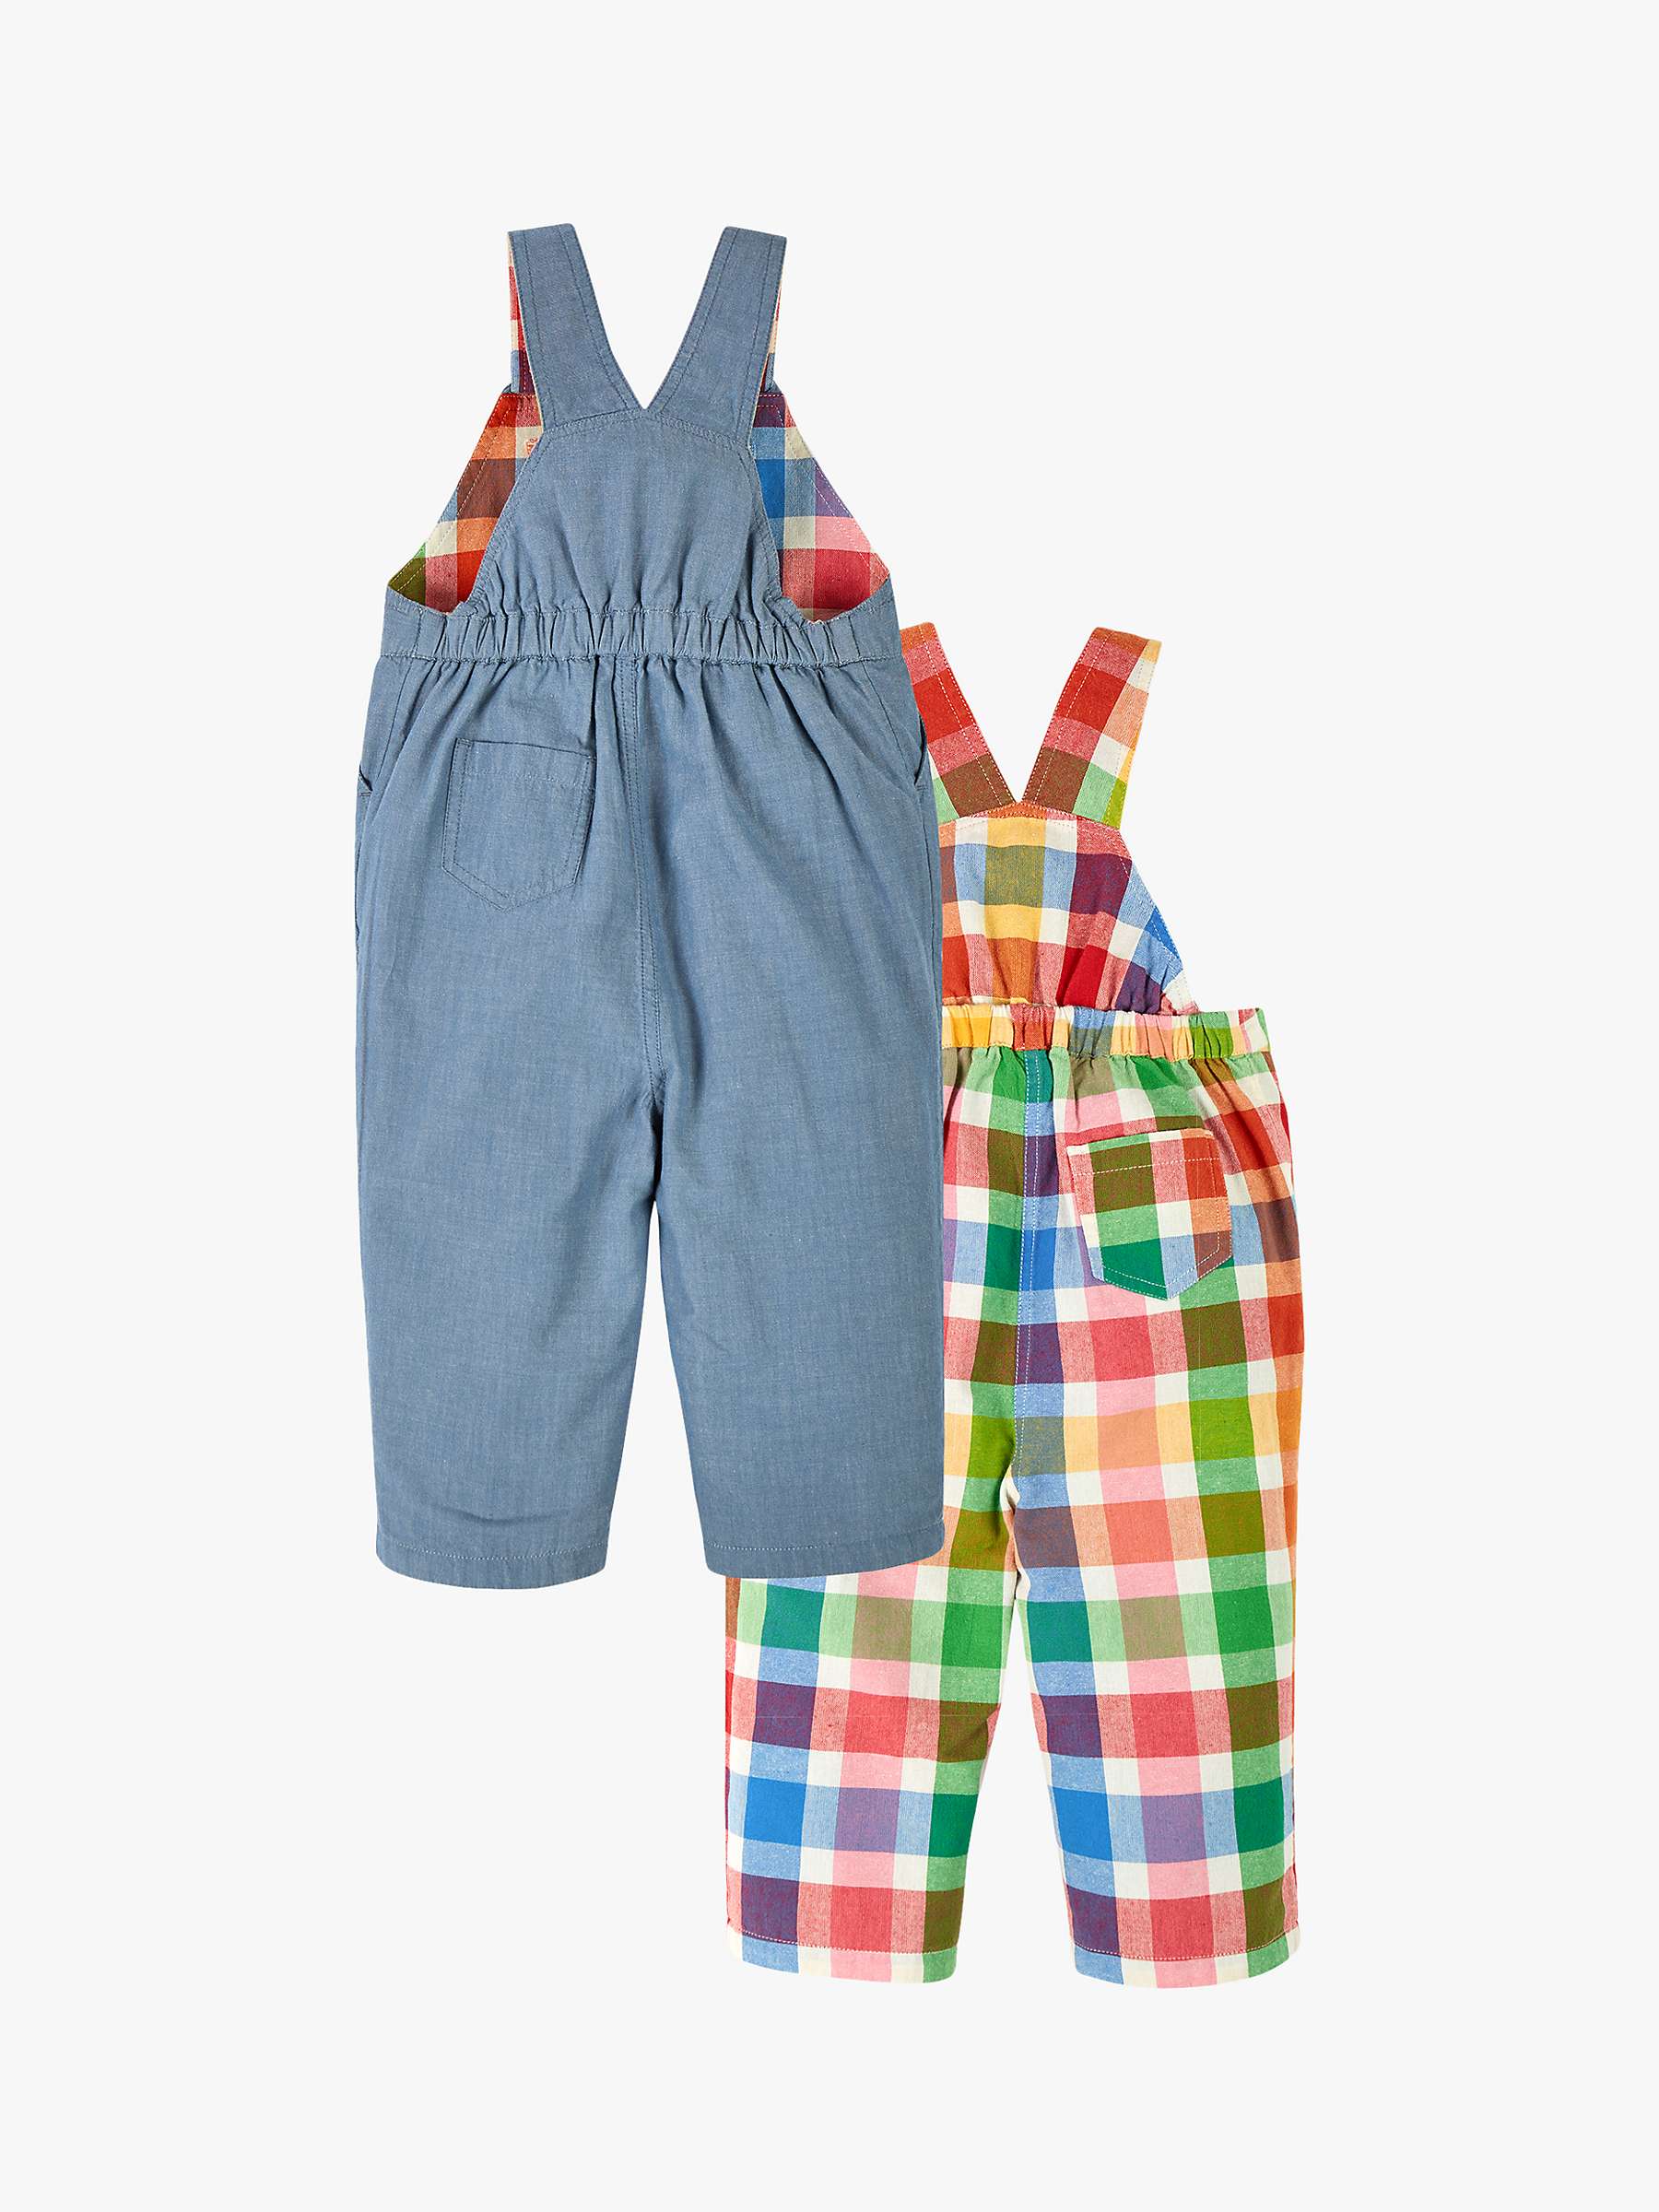 Buy Frugi Baby Rio Reversible Dungarees, Rainbow/Chambray Online at johnlewis.com